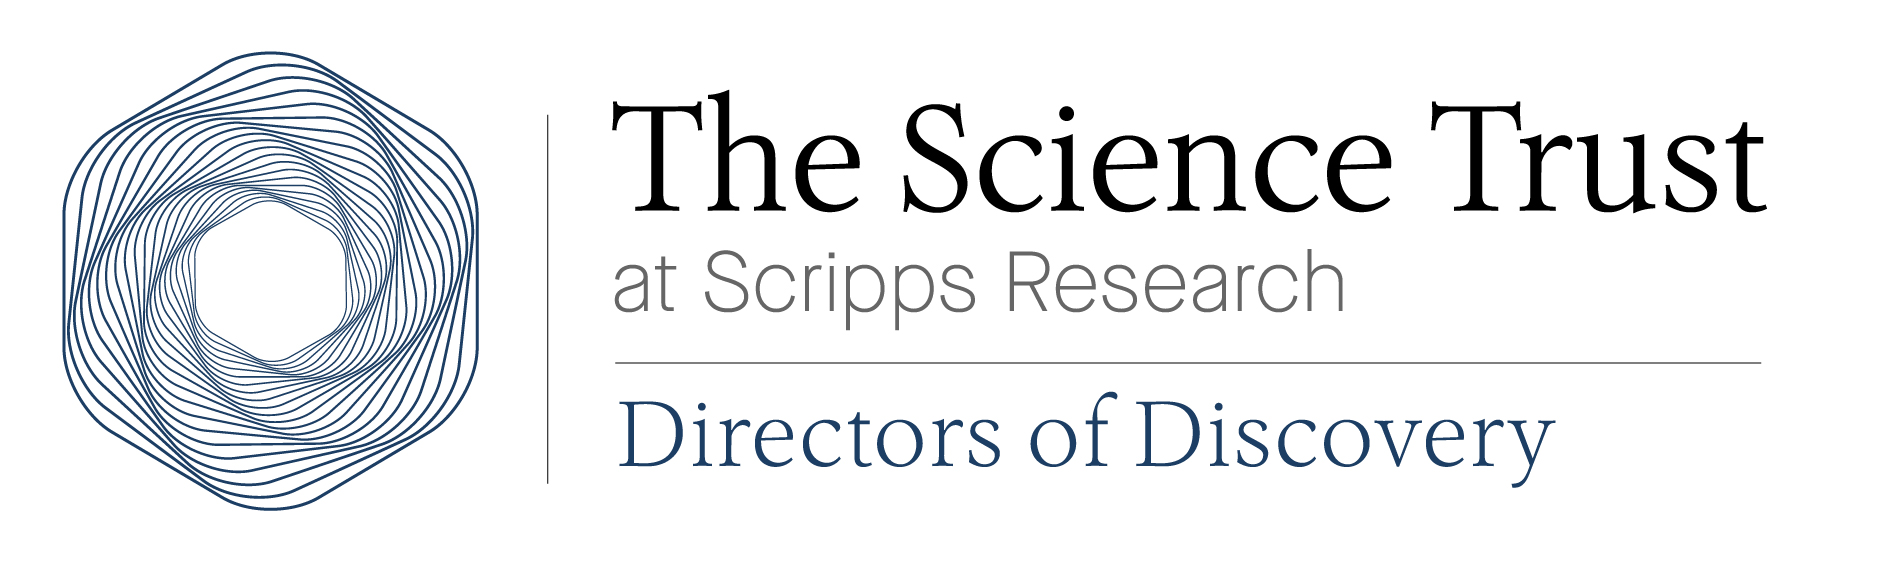 Directors of Discovery 